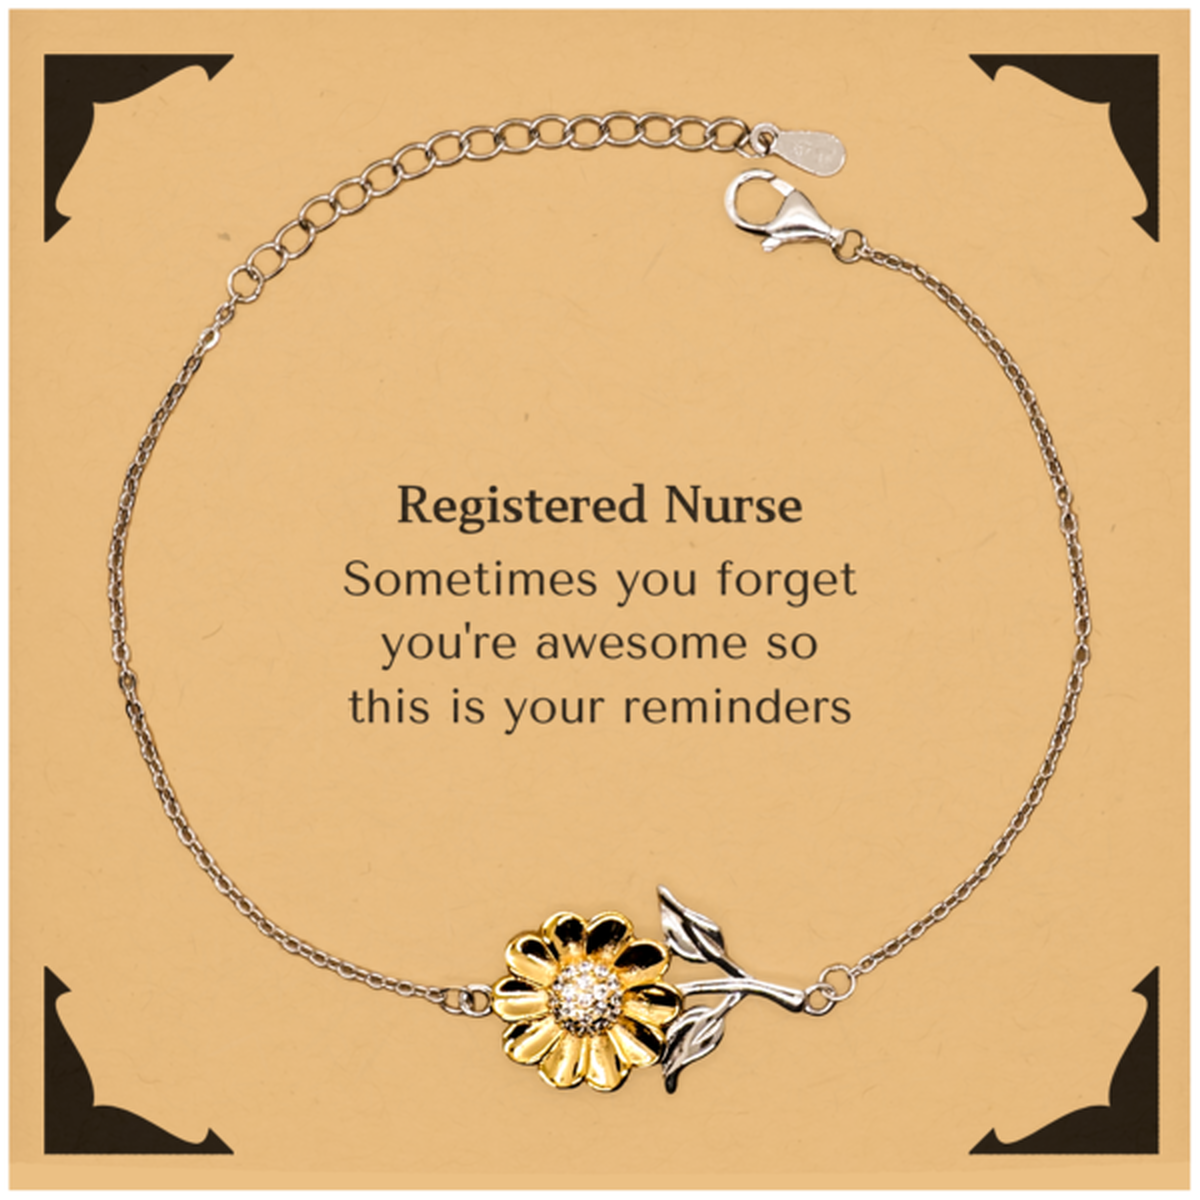 Sentimental Registered Nurse Sunflower Bracelet, Registered Nurse Sometimes you forget you're awesome so this is your reminders, Graduation Christmas Birthday Gifts for Registered Nurse, Men, Women, Coworkers